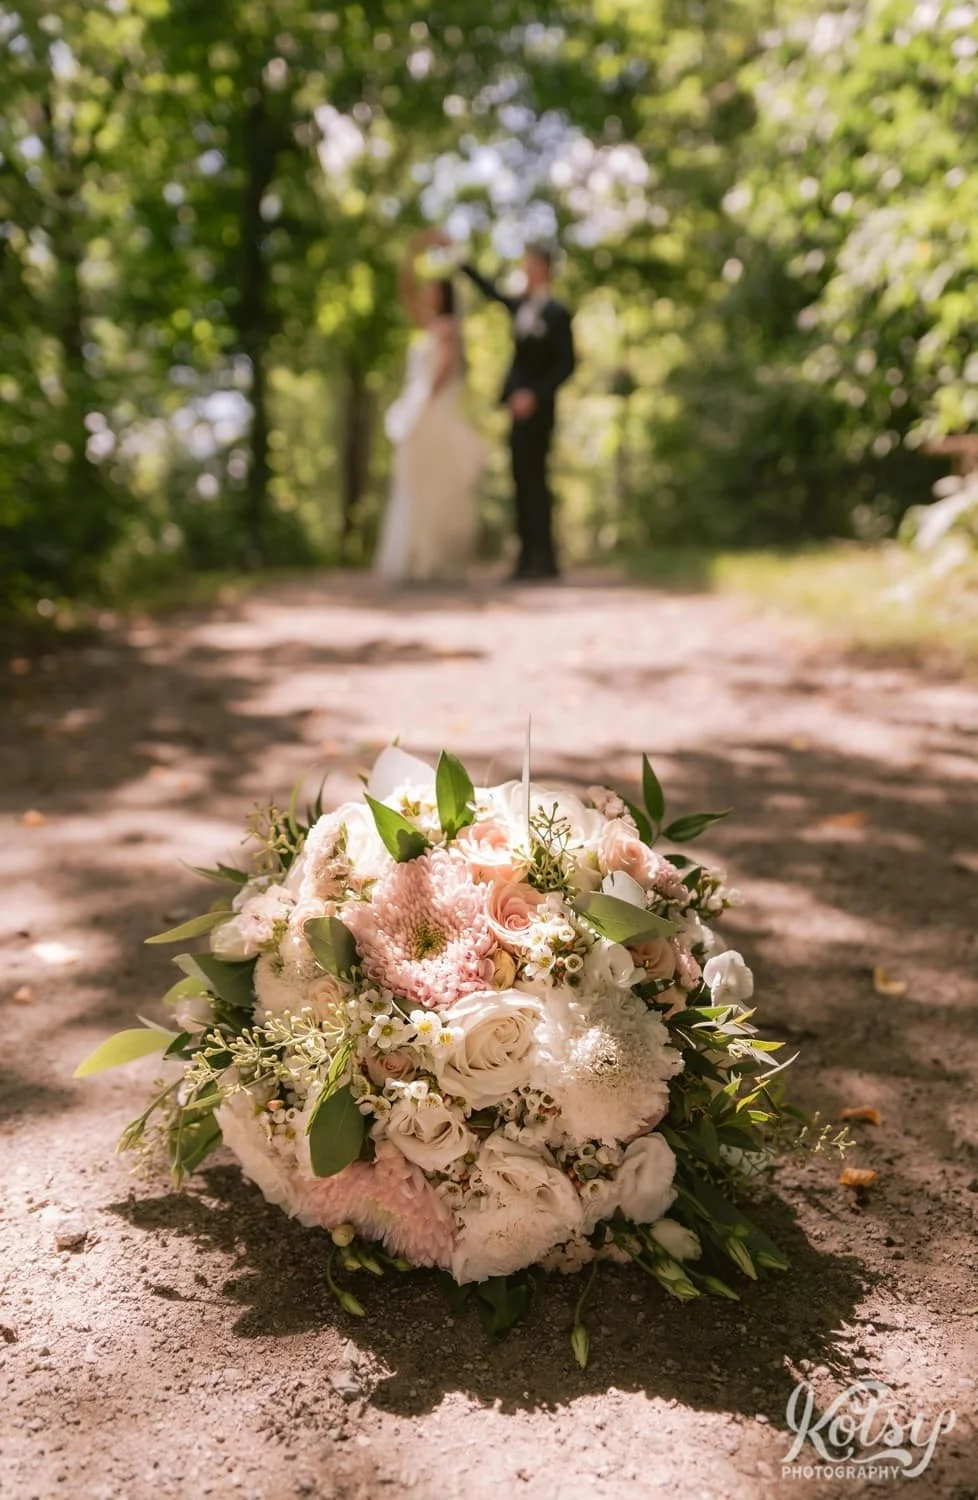 A close up shot of a flower bouquet on a dirt path with an out of focus groom spinning his bride in the background. Photographed at Hunter's Point Wildlife Park in Toronto, Ontario, Canada